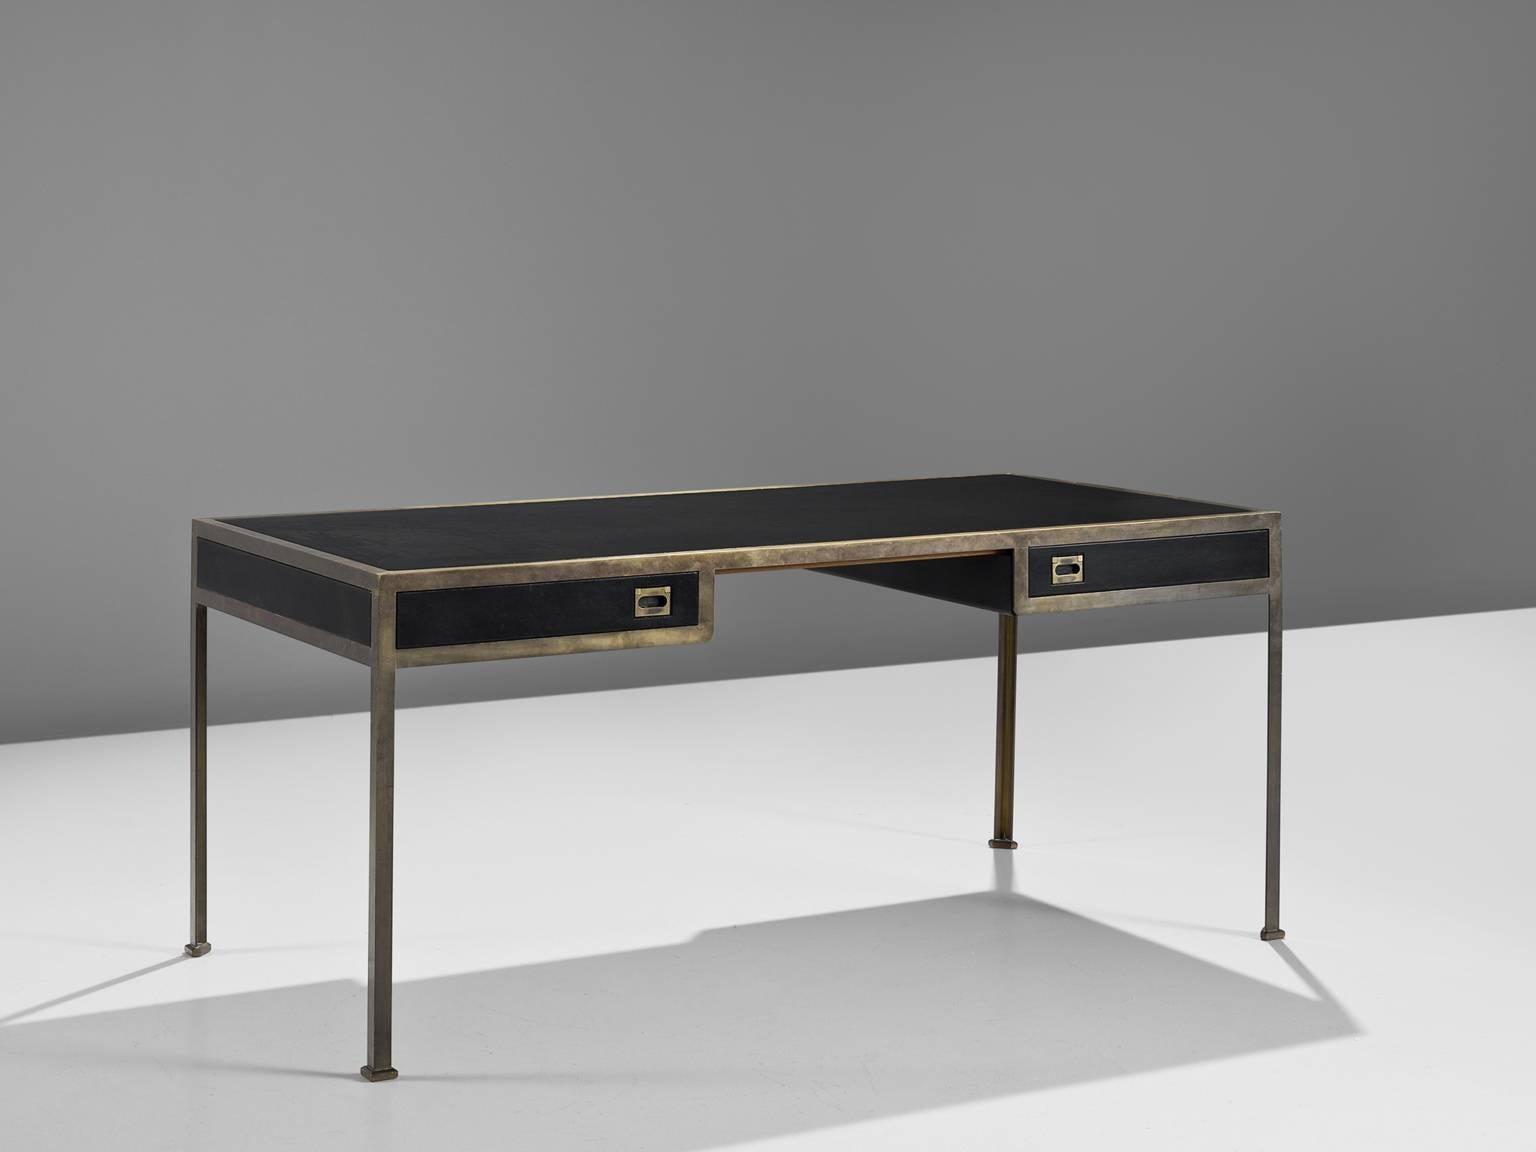 Desk, leather and brass, France, 1960s.

This desk is simplistic in its design but extremely refined. The desk is defined by use of the high-quality, durable materials brass and leather. These materials have the intrinsic qualities of becoming